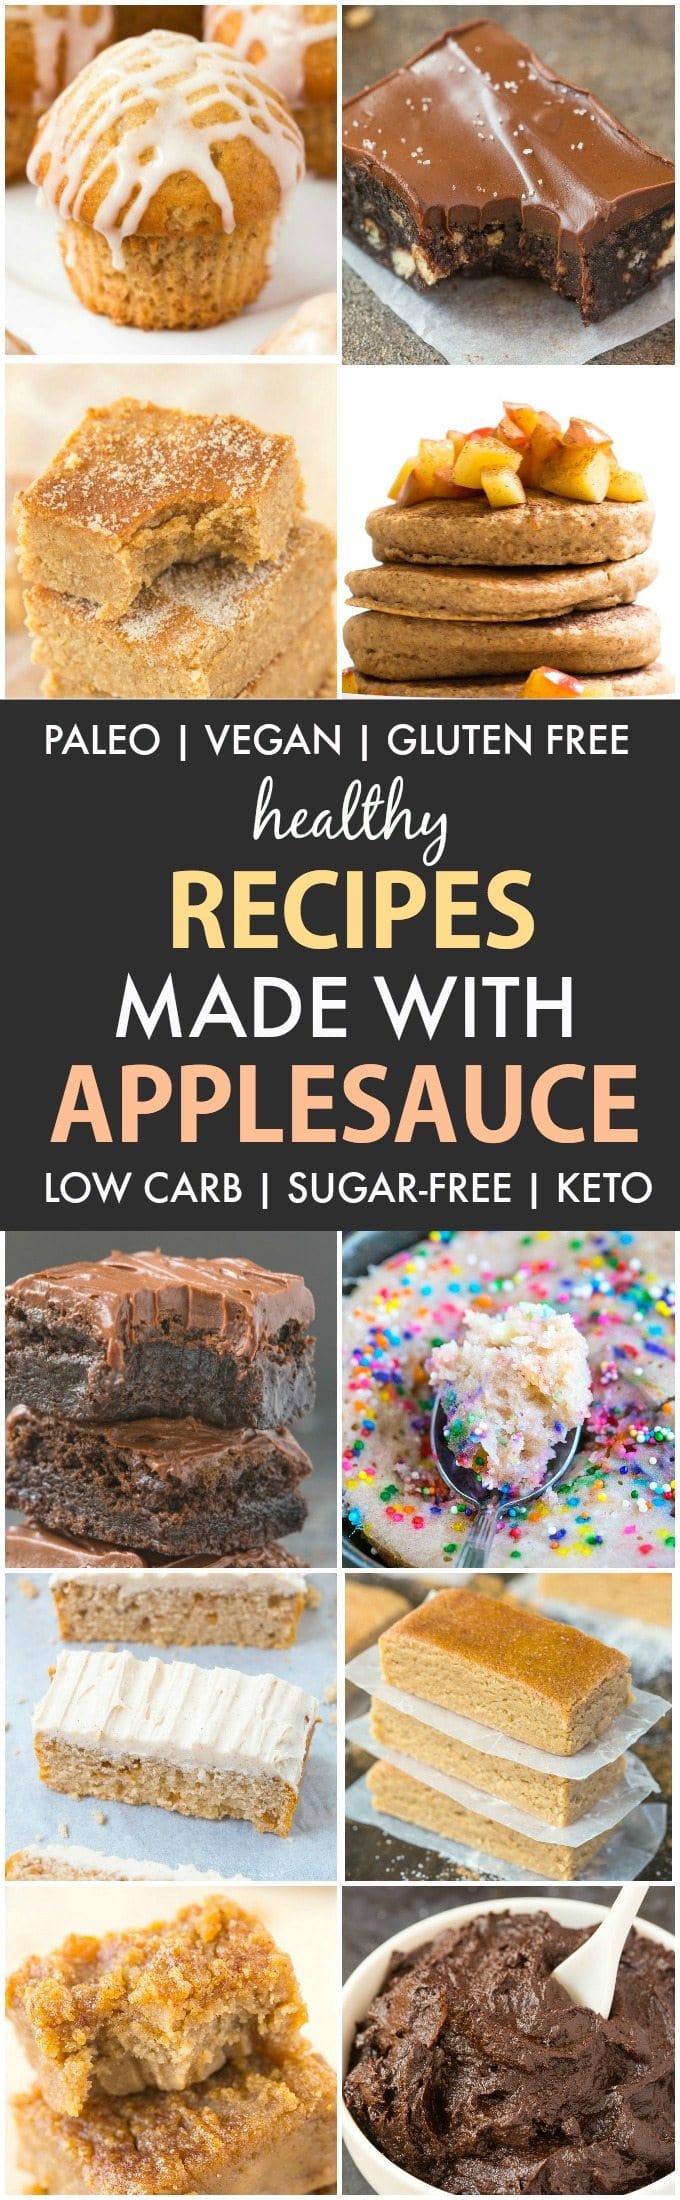 Healthy Recipes made with Applesauce (Paleo, Vegan, Gluten Free)- Easy ways to use leftover applesauce in a variety of recipes- Brownies, cakes, muffins no-bakes and more! Keto + Low Carb options too! #applesauce #healthybaking #healthy #sugarfree | Recipe on thebigmansworld.com